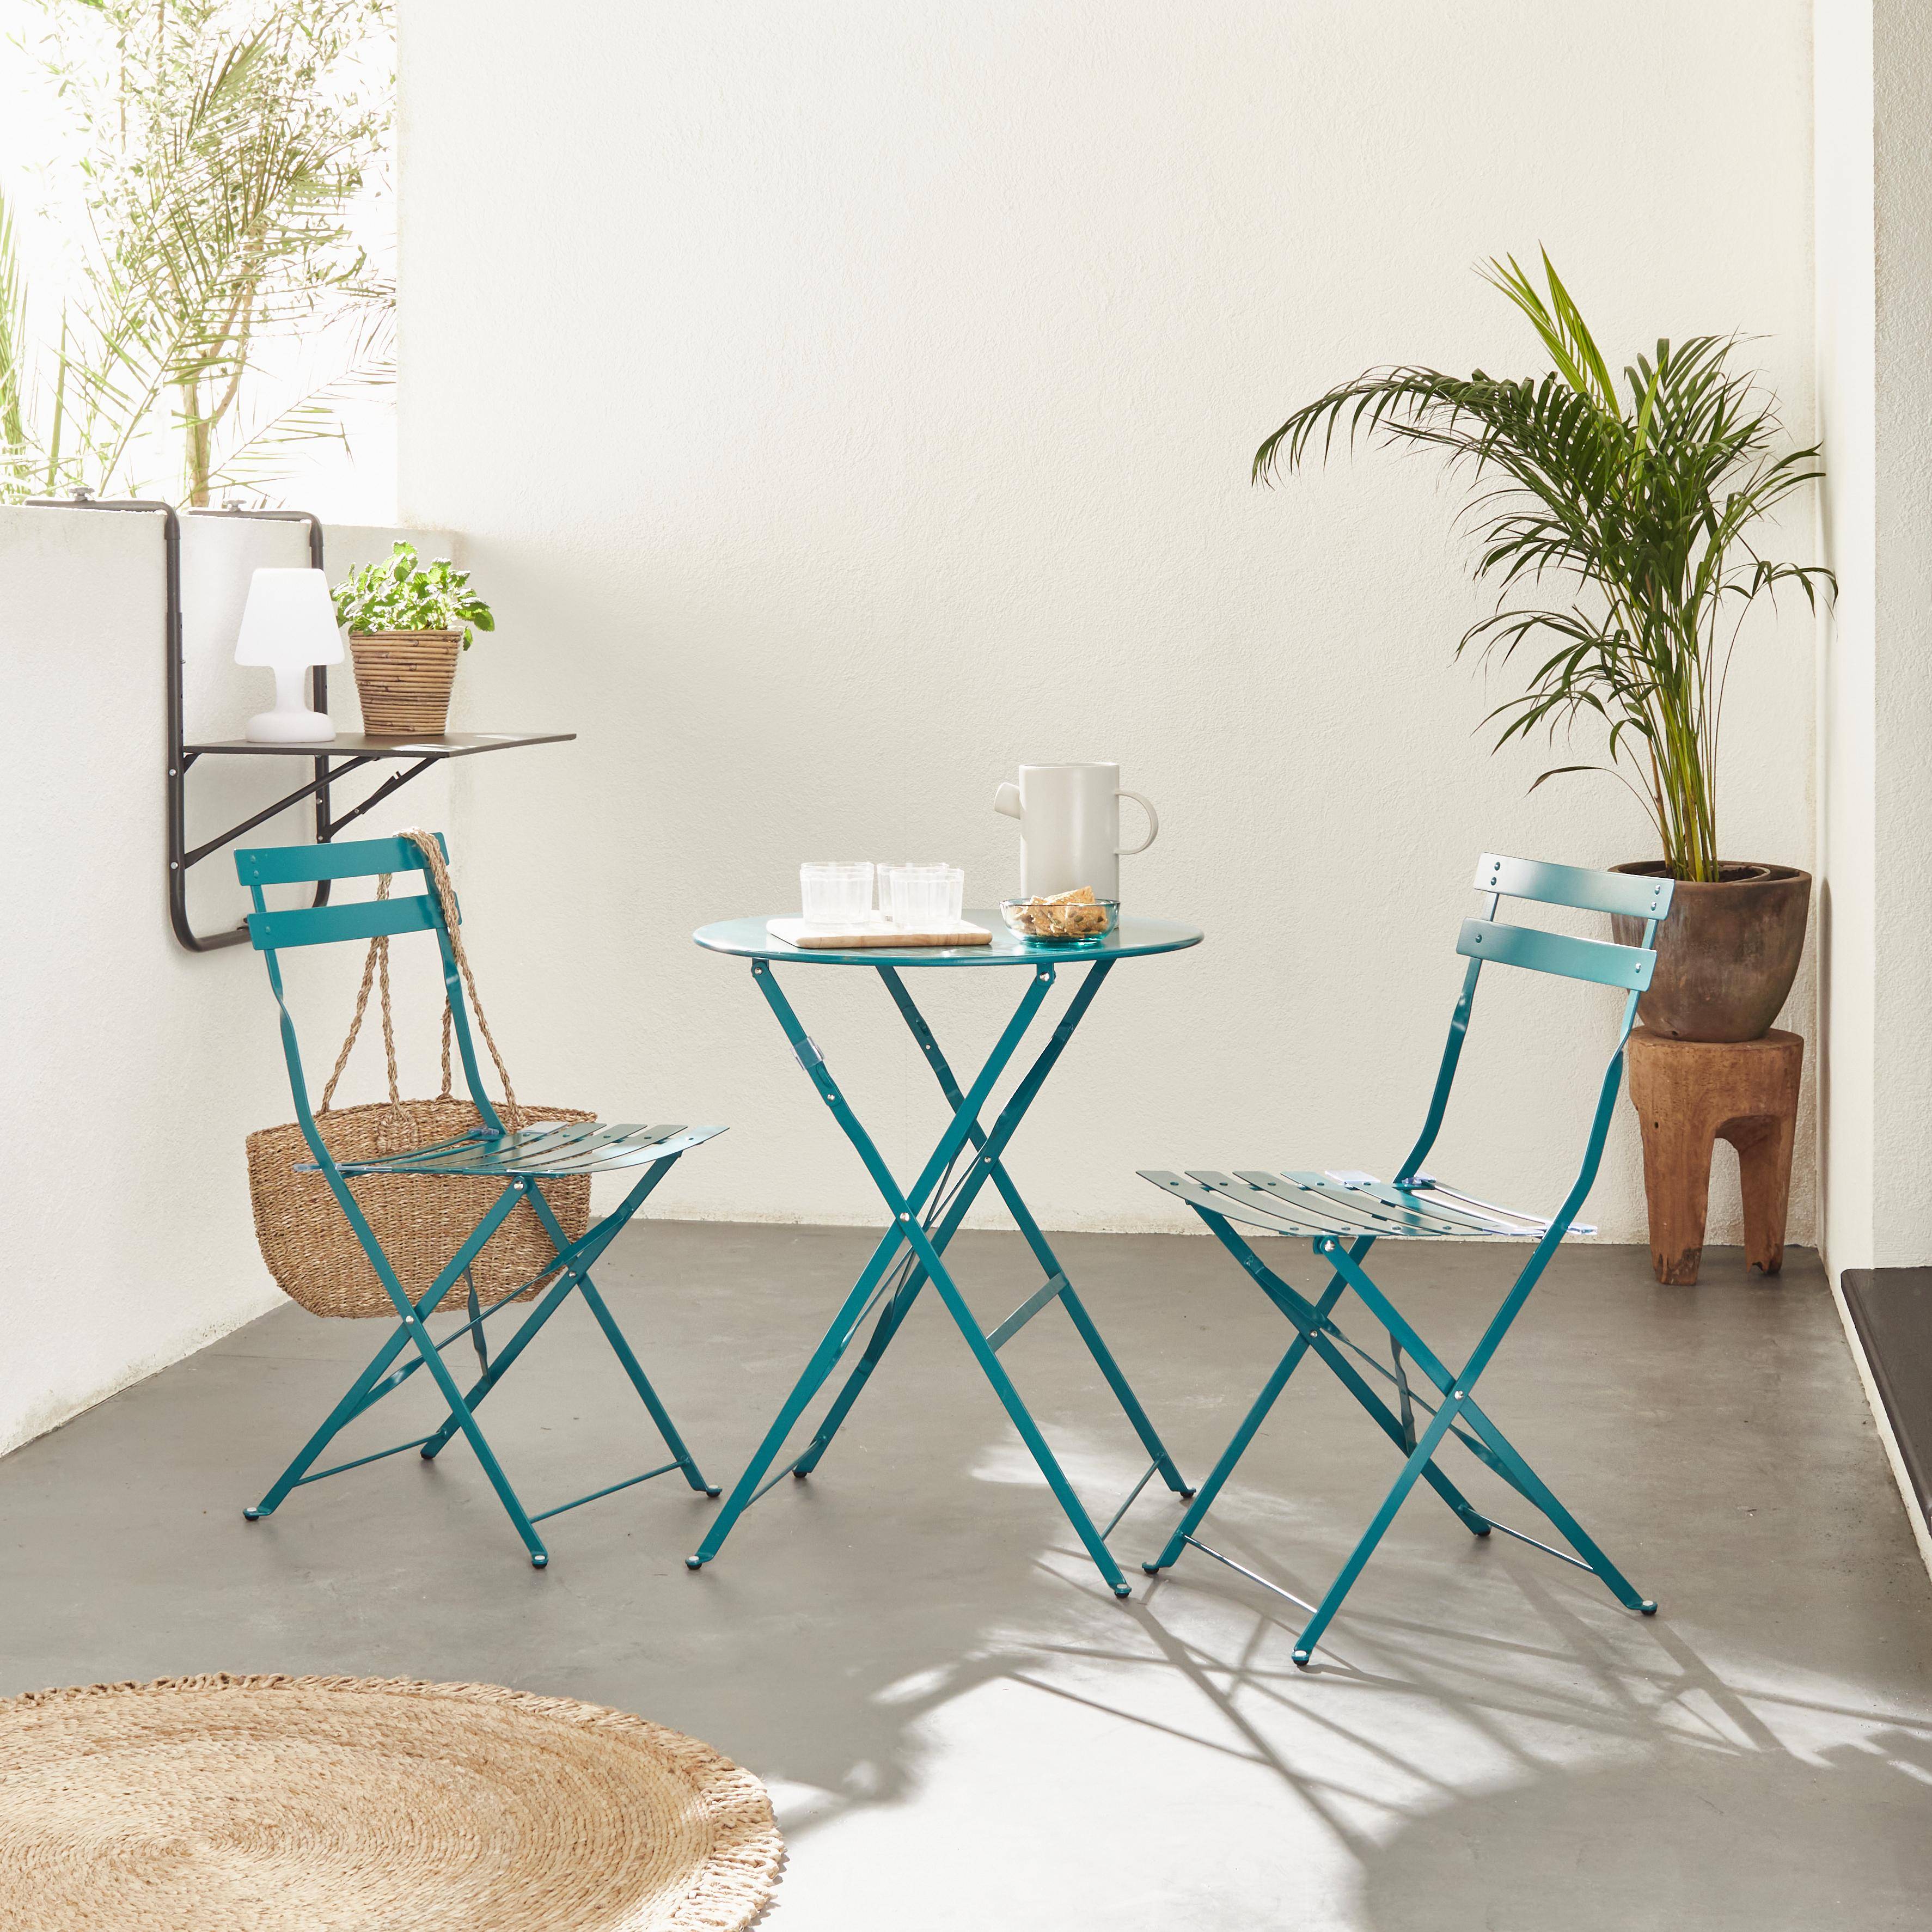 Foldable bistro garden table - Round Emilia duck blue - Round table Ø60cm, thermo-lacquered steel,sweeek,Photo6